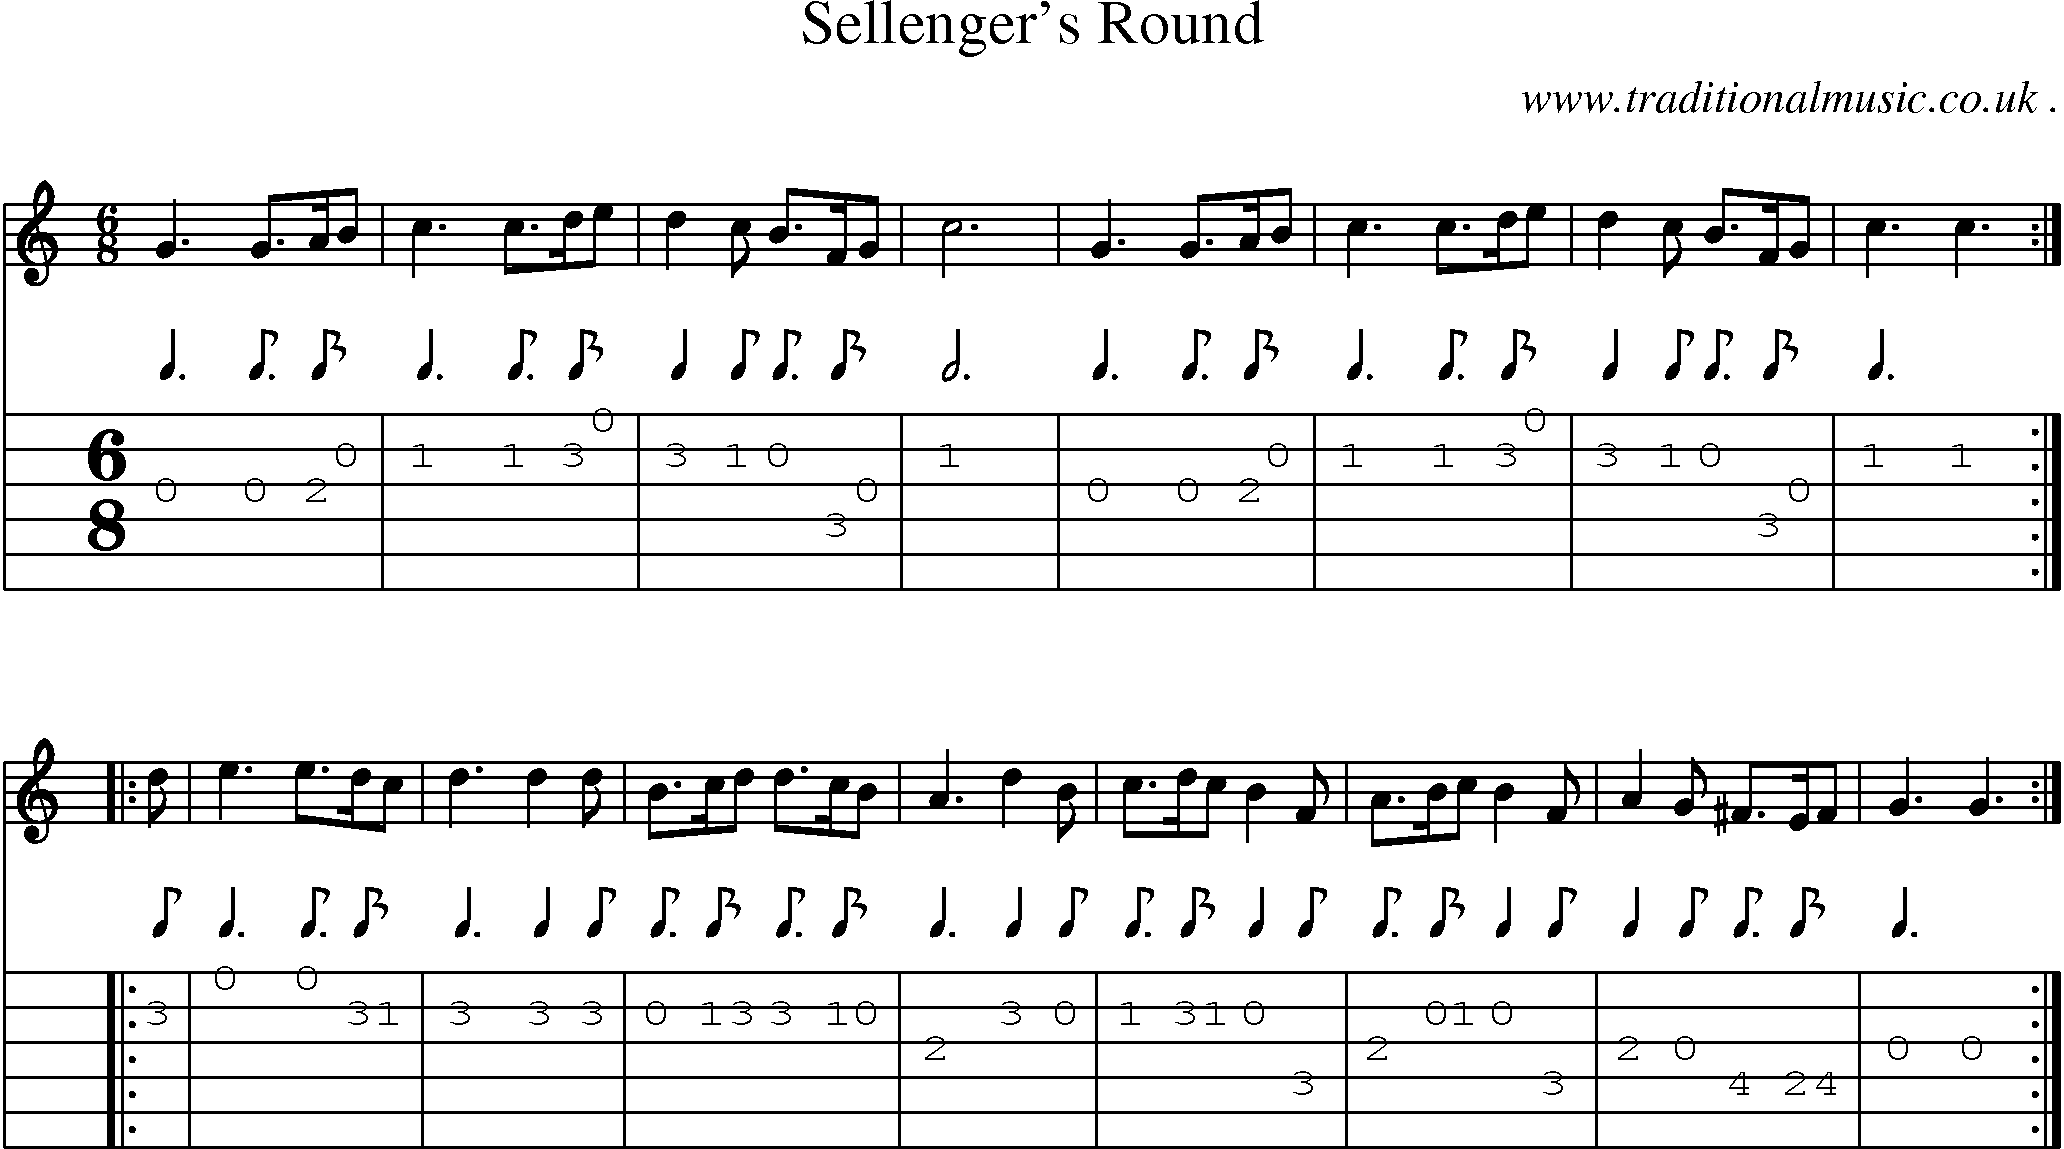 Sheet-Music and Guitar Tabs for Sellengers Round